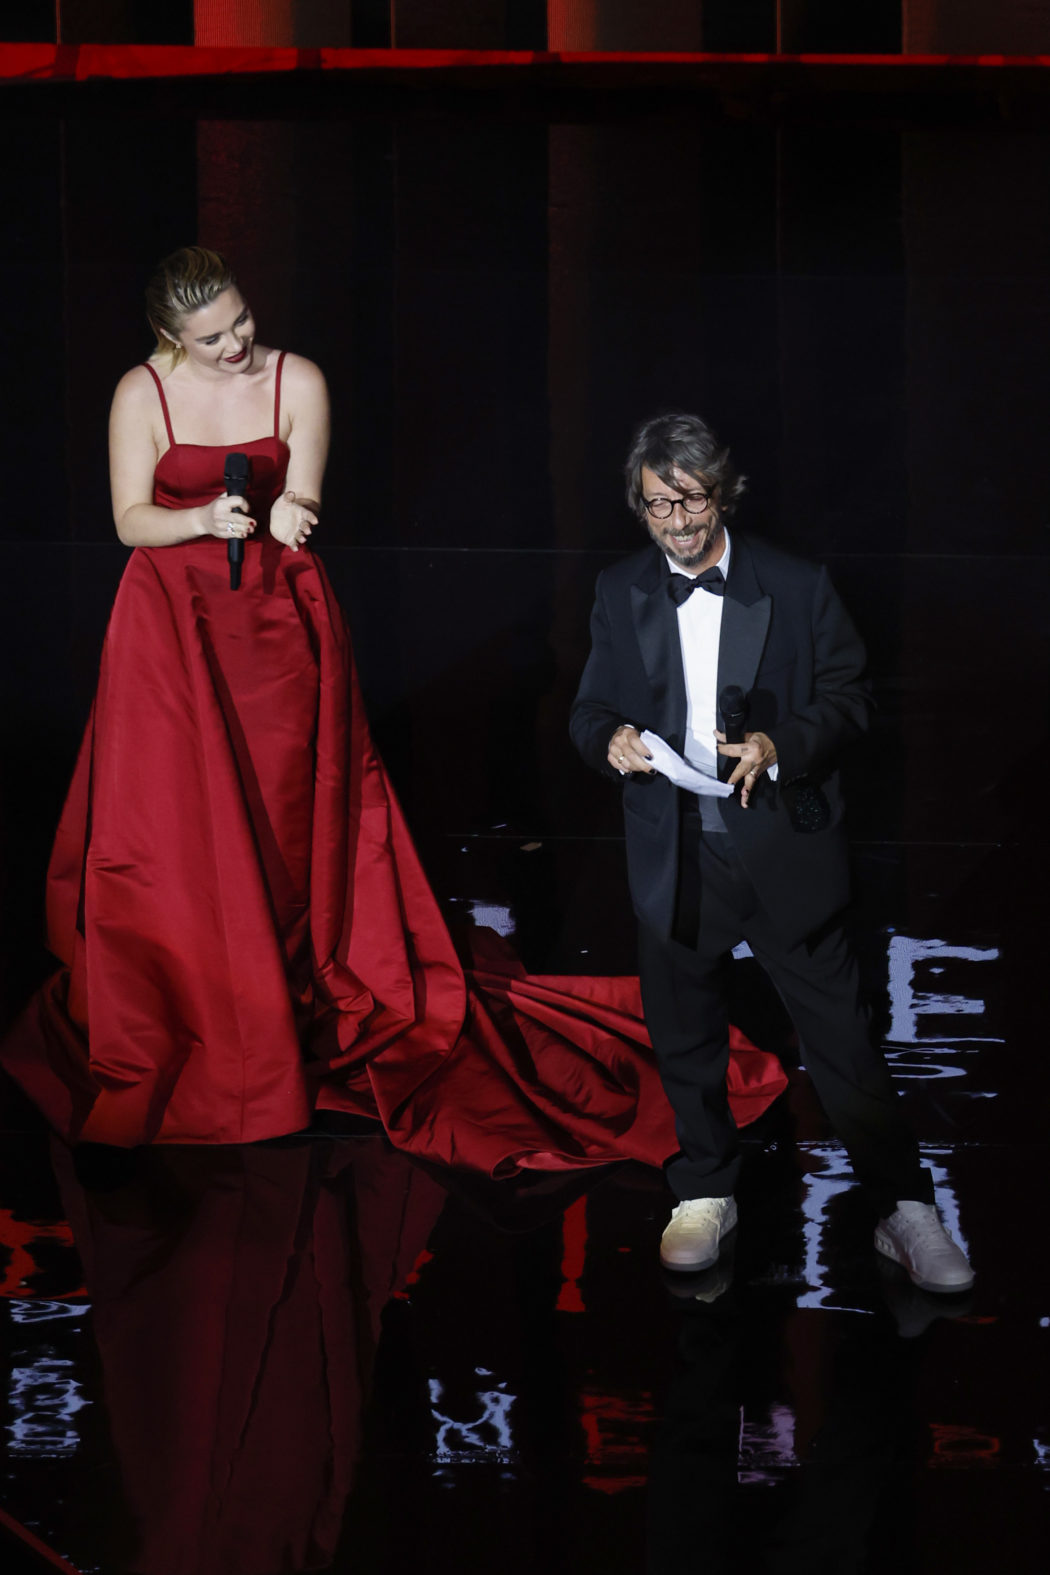 LONDON, ENGLAND – DECEMBER 05: Florence Pugh presents the Designer Of The Year award to Pierpaolo Piccioli for Valentino on stage during The Fashion Awards 2022 at the Royal Albert Hall on December 05, 2022 in London, England. (Photo by John Phillips/BFC/Getty Images for BFC)